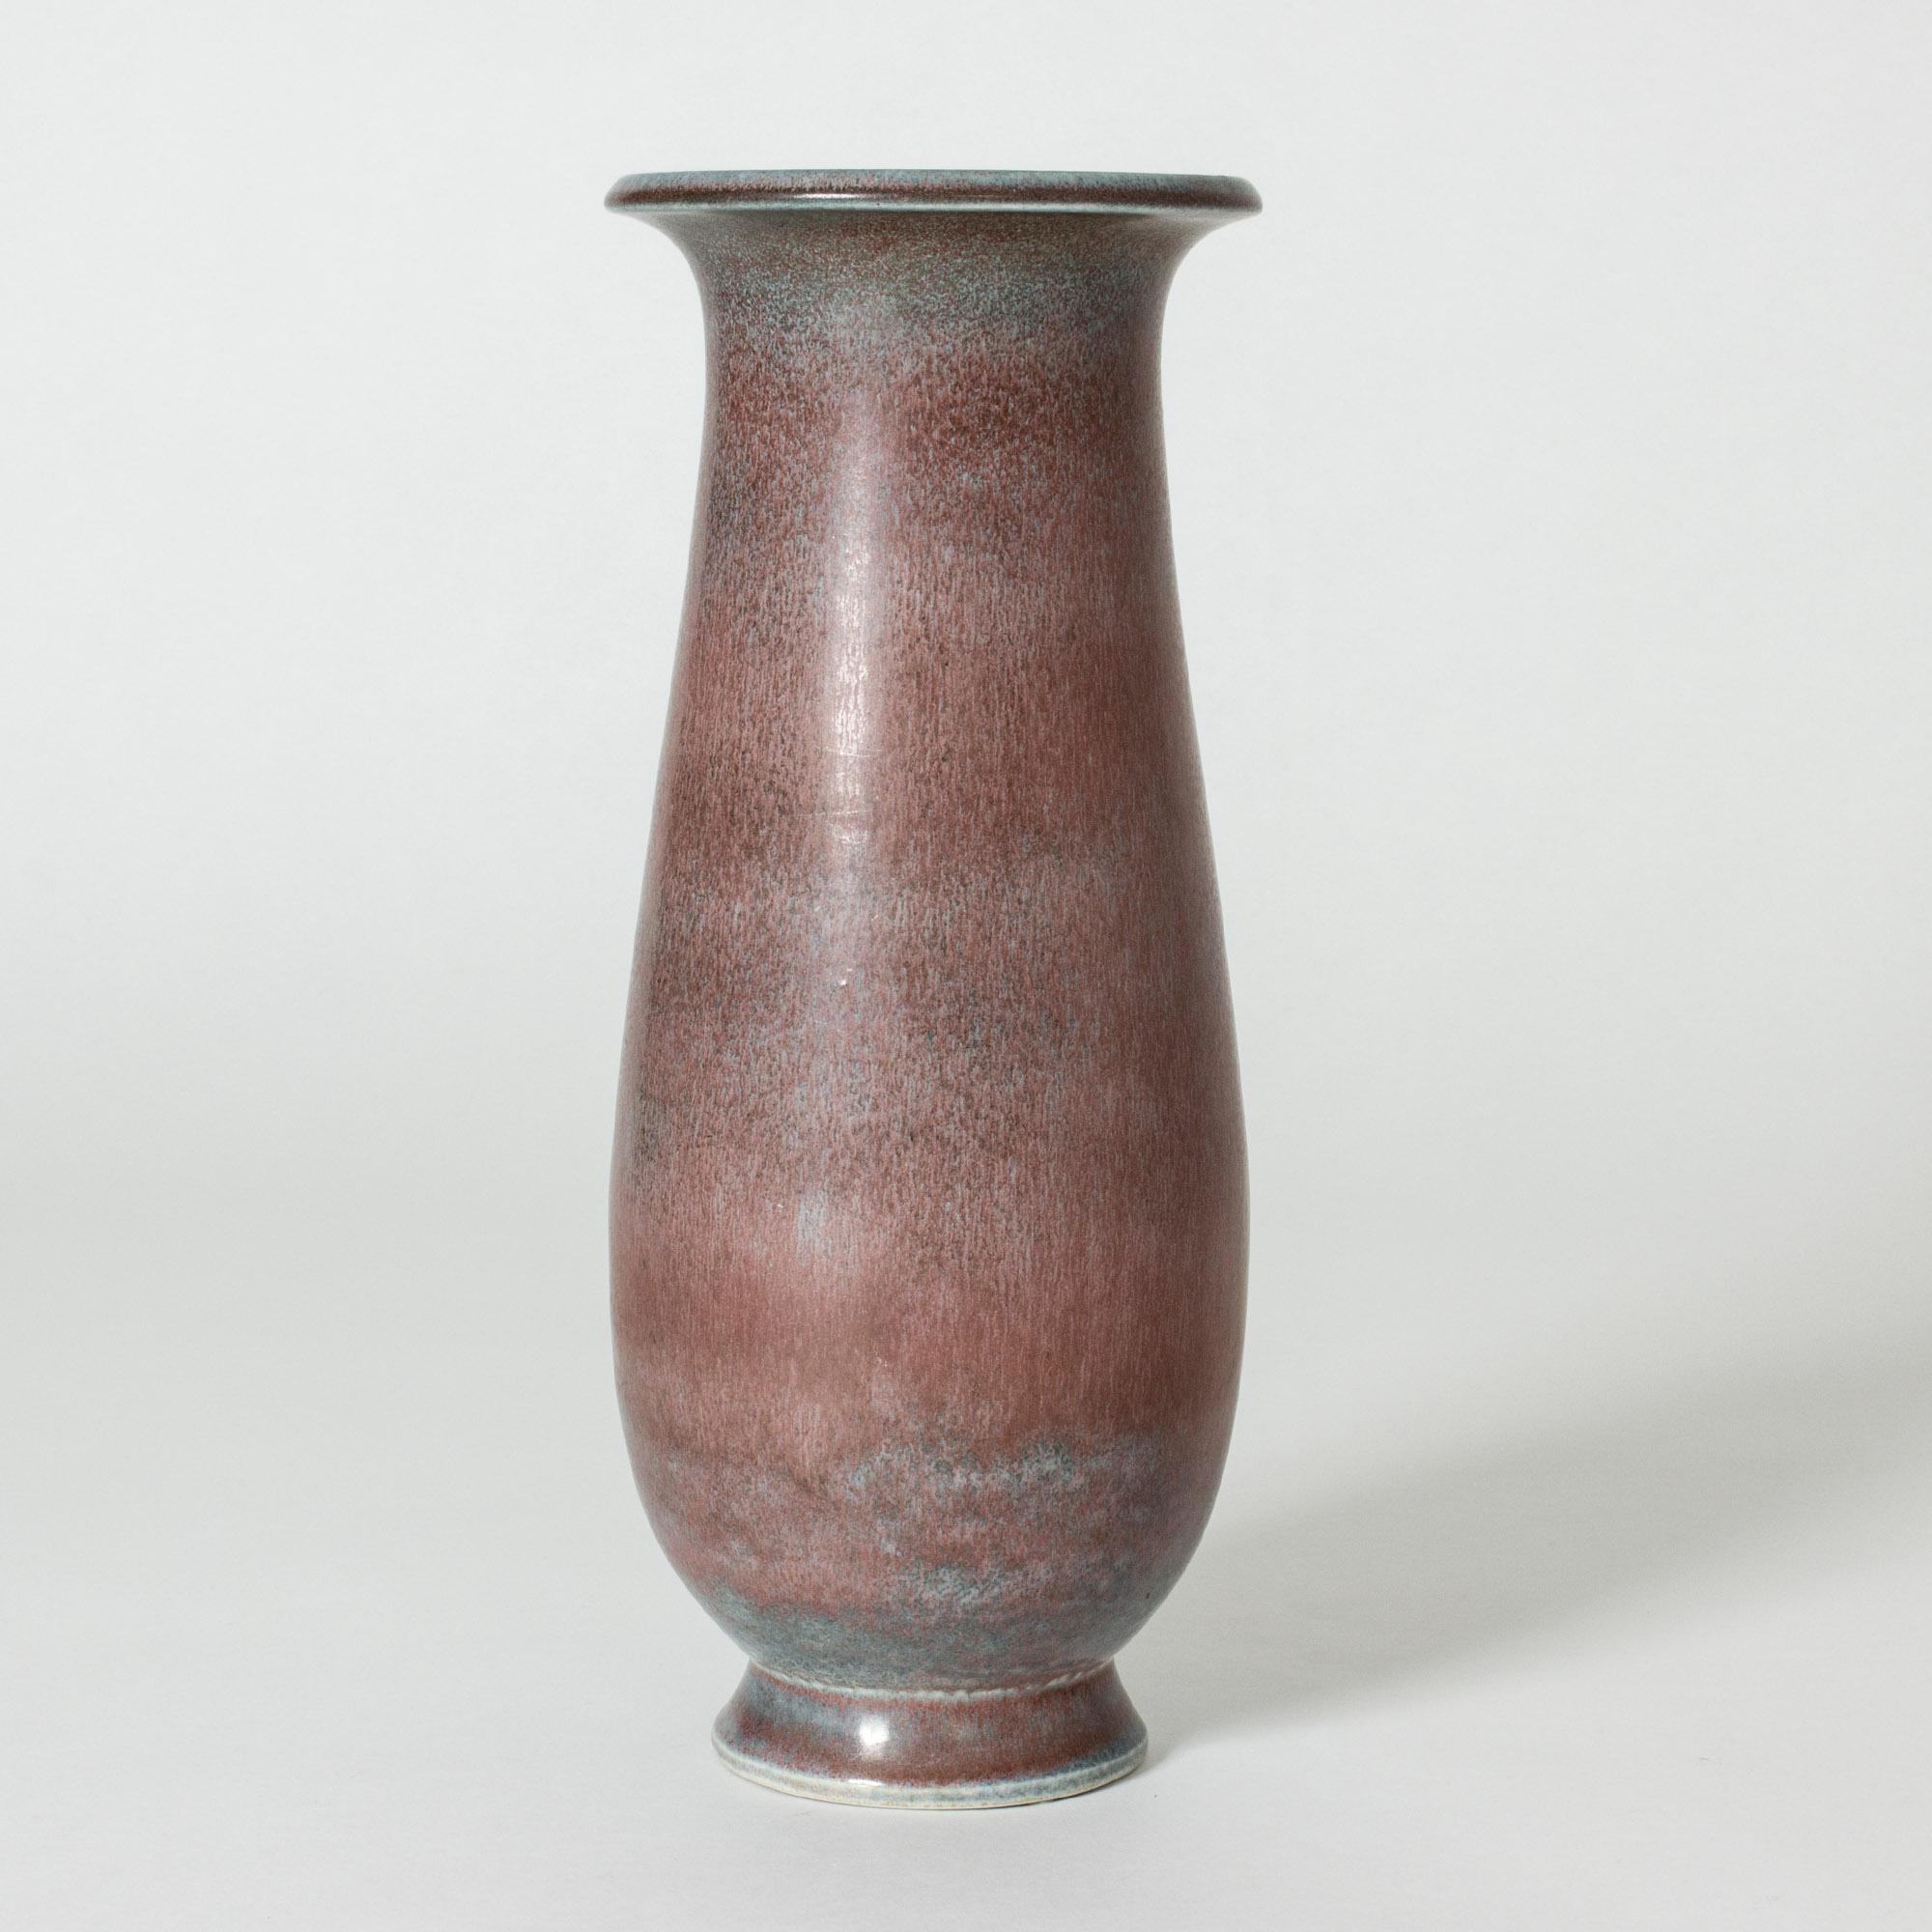 Beautiful stoneware floor vase by Gunnar Nylund with appealing soft lines. Amazing glaze in red and cool light blue shades.